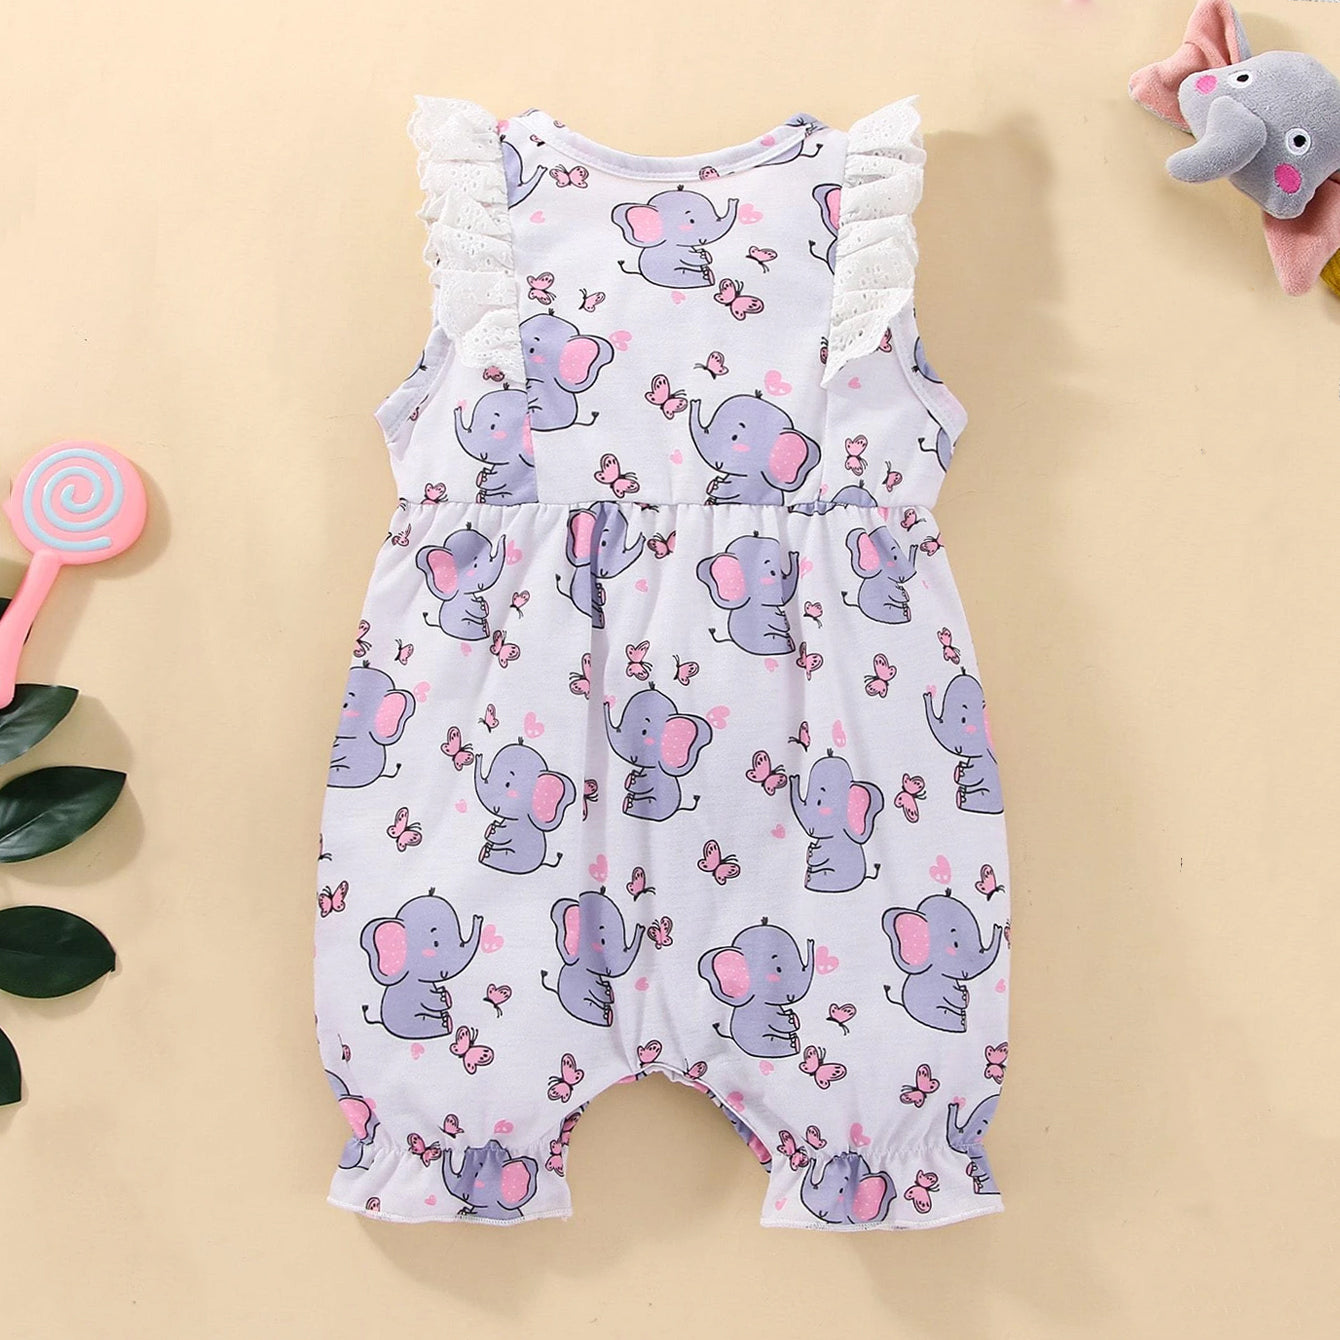 Lovely Elephant Printed Ruffle Bow Decorate Baby Jumpsuit